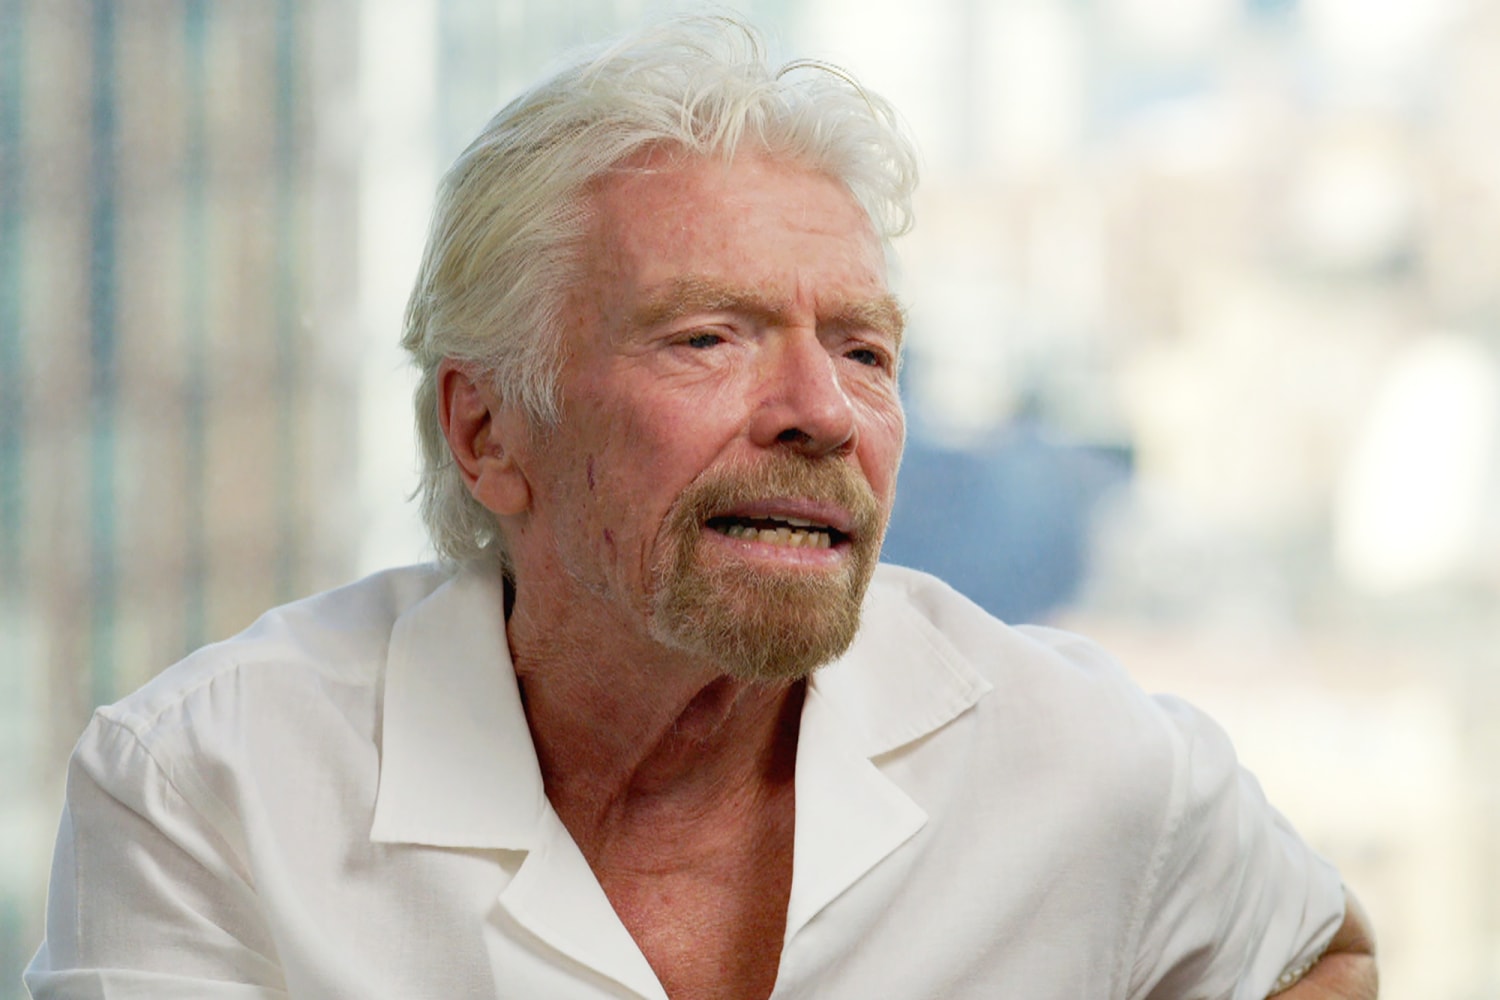 Richard Branson talks new climate change coalition and his plans to return  to space